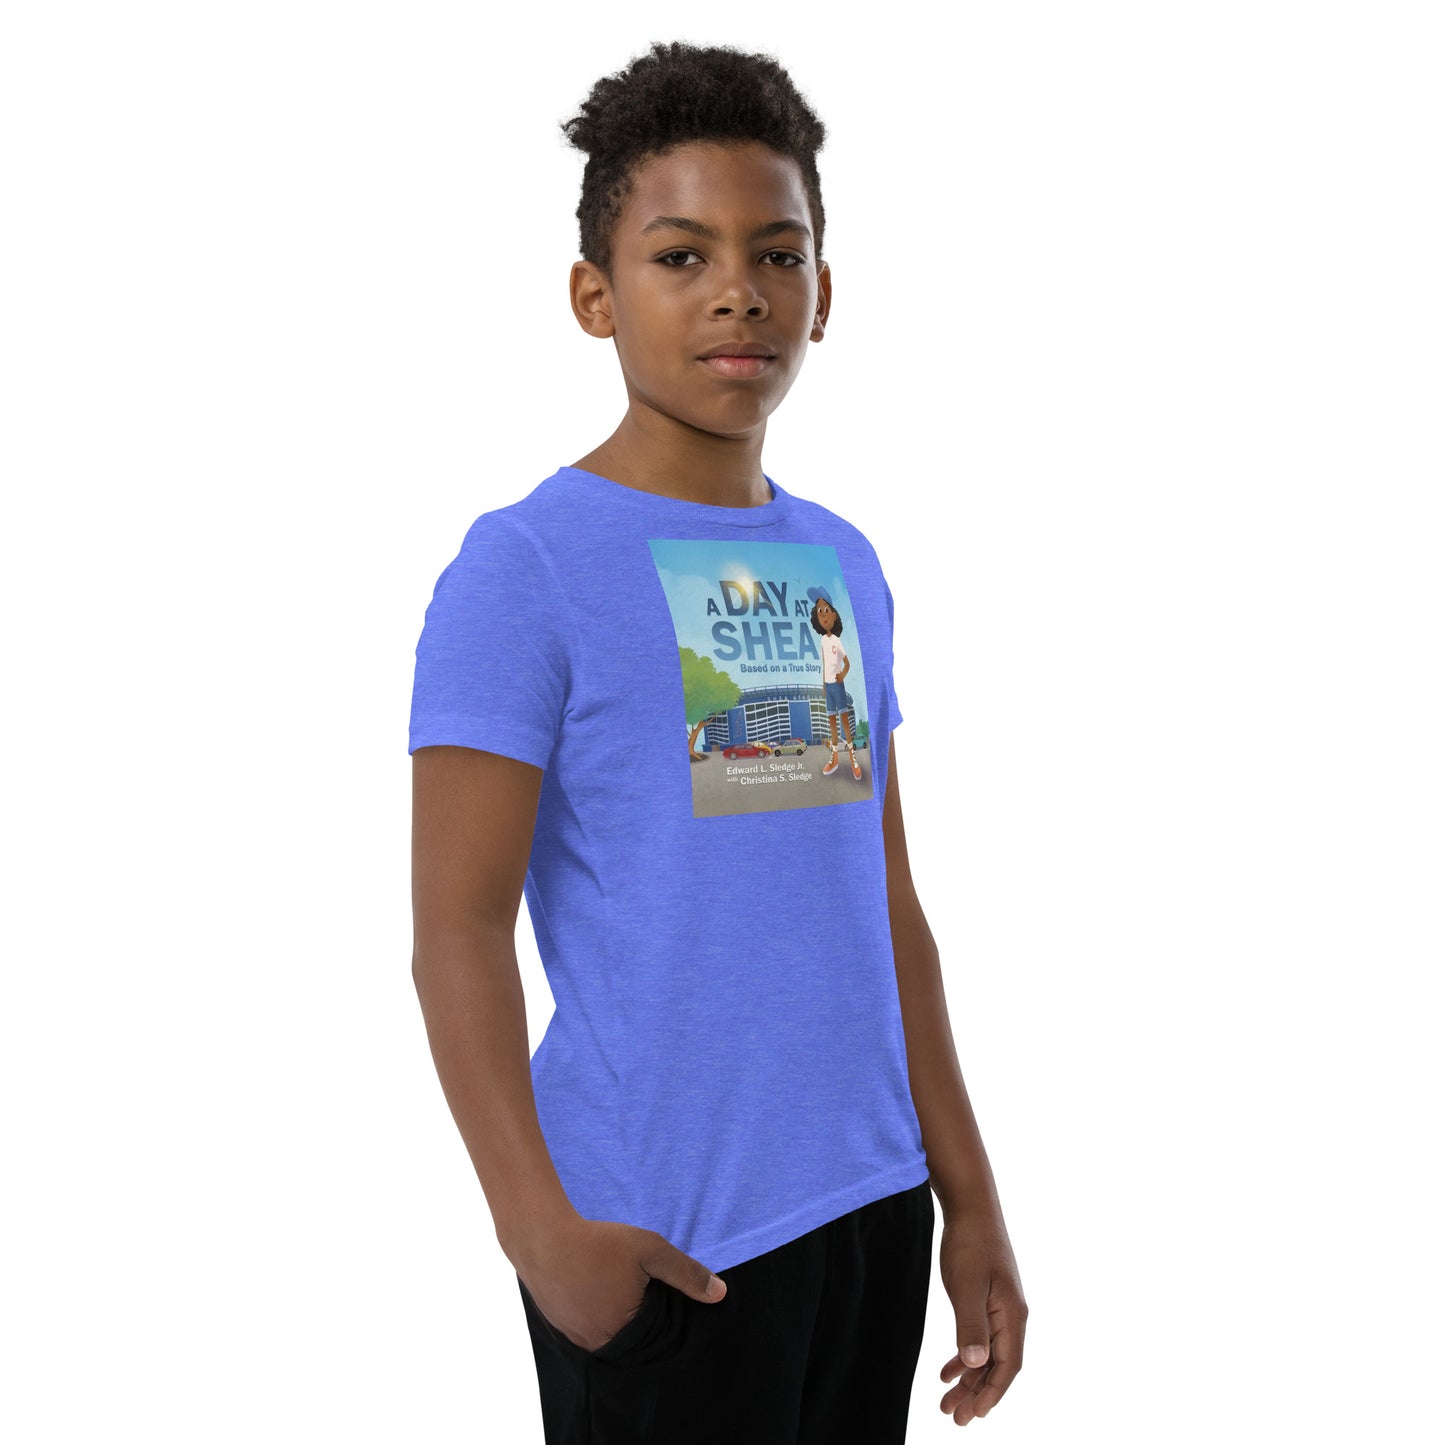 A Day at Shea Youth Graphic T-Shirt